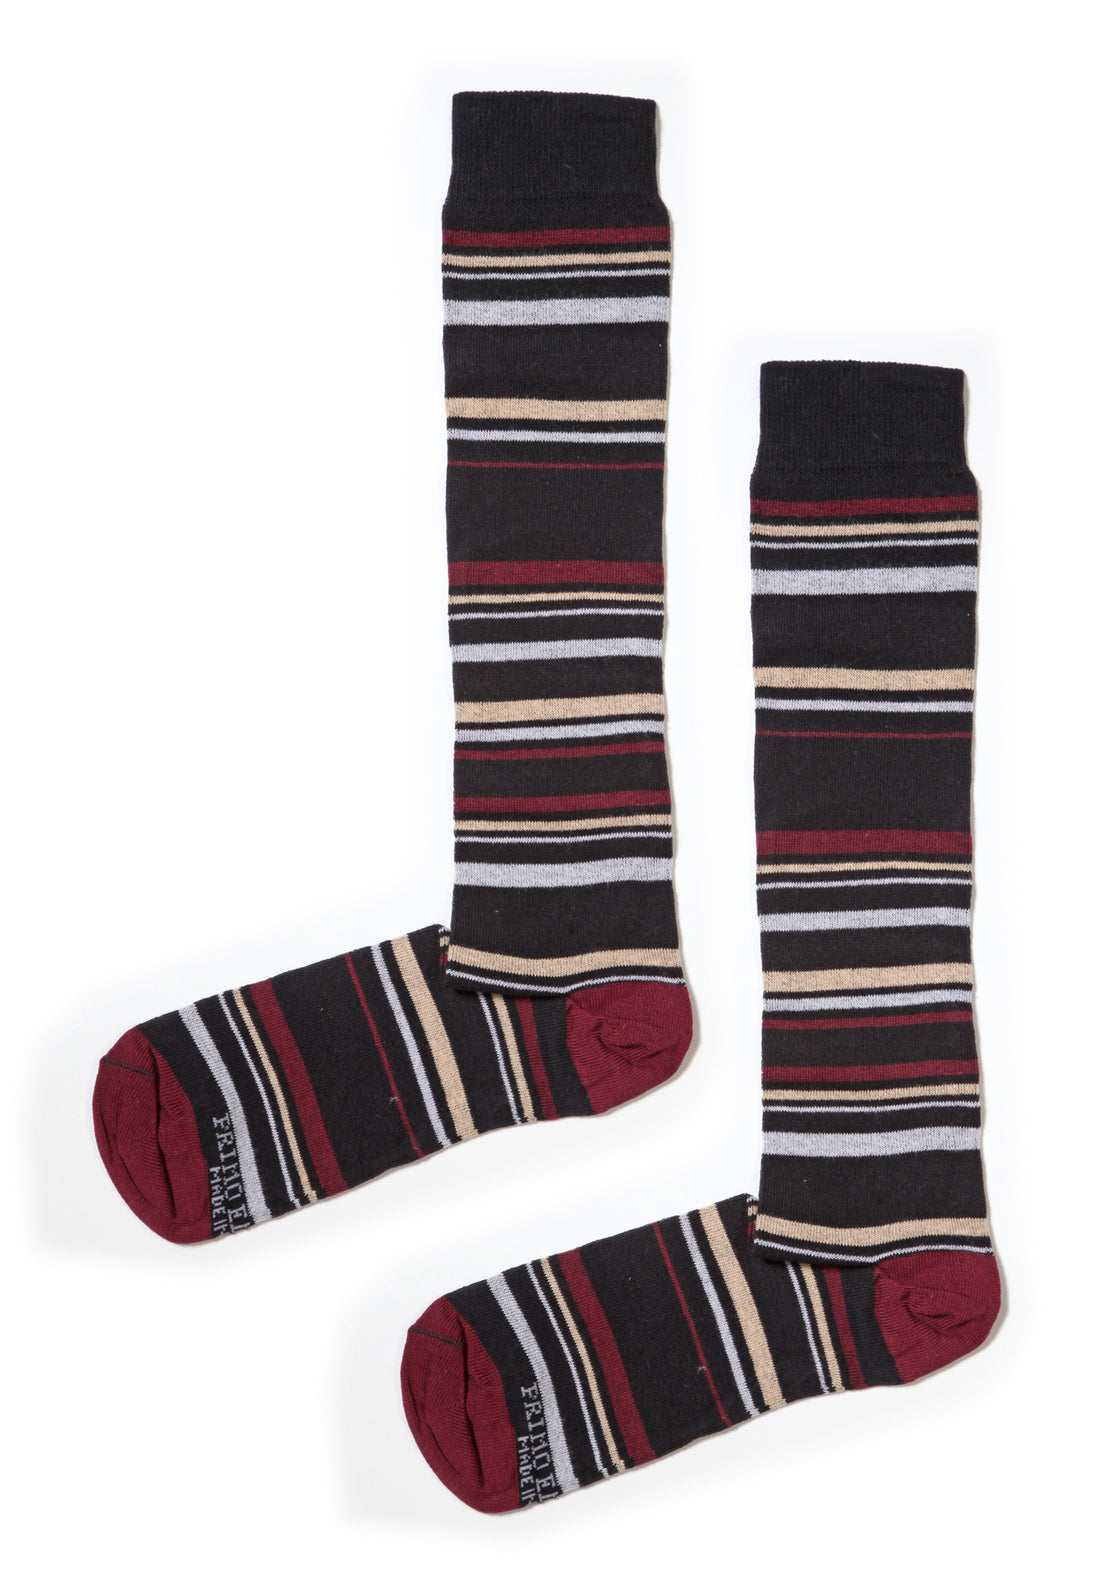 Trio of Long Cotton Socks in Various Patterns